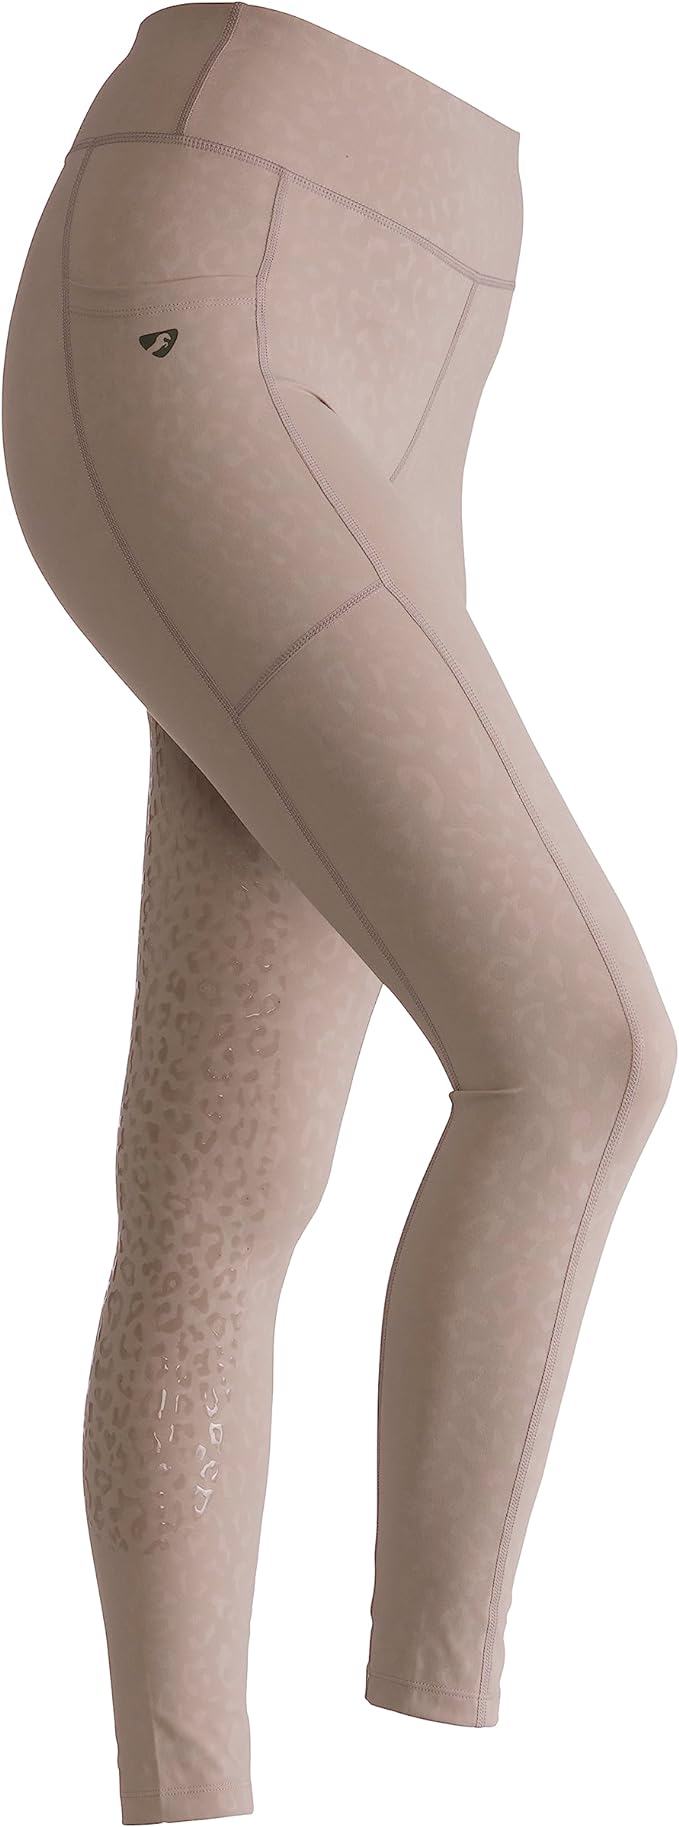 Shires Aubrion Non-Stop Ladies Riding Tights #8957